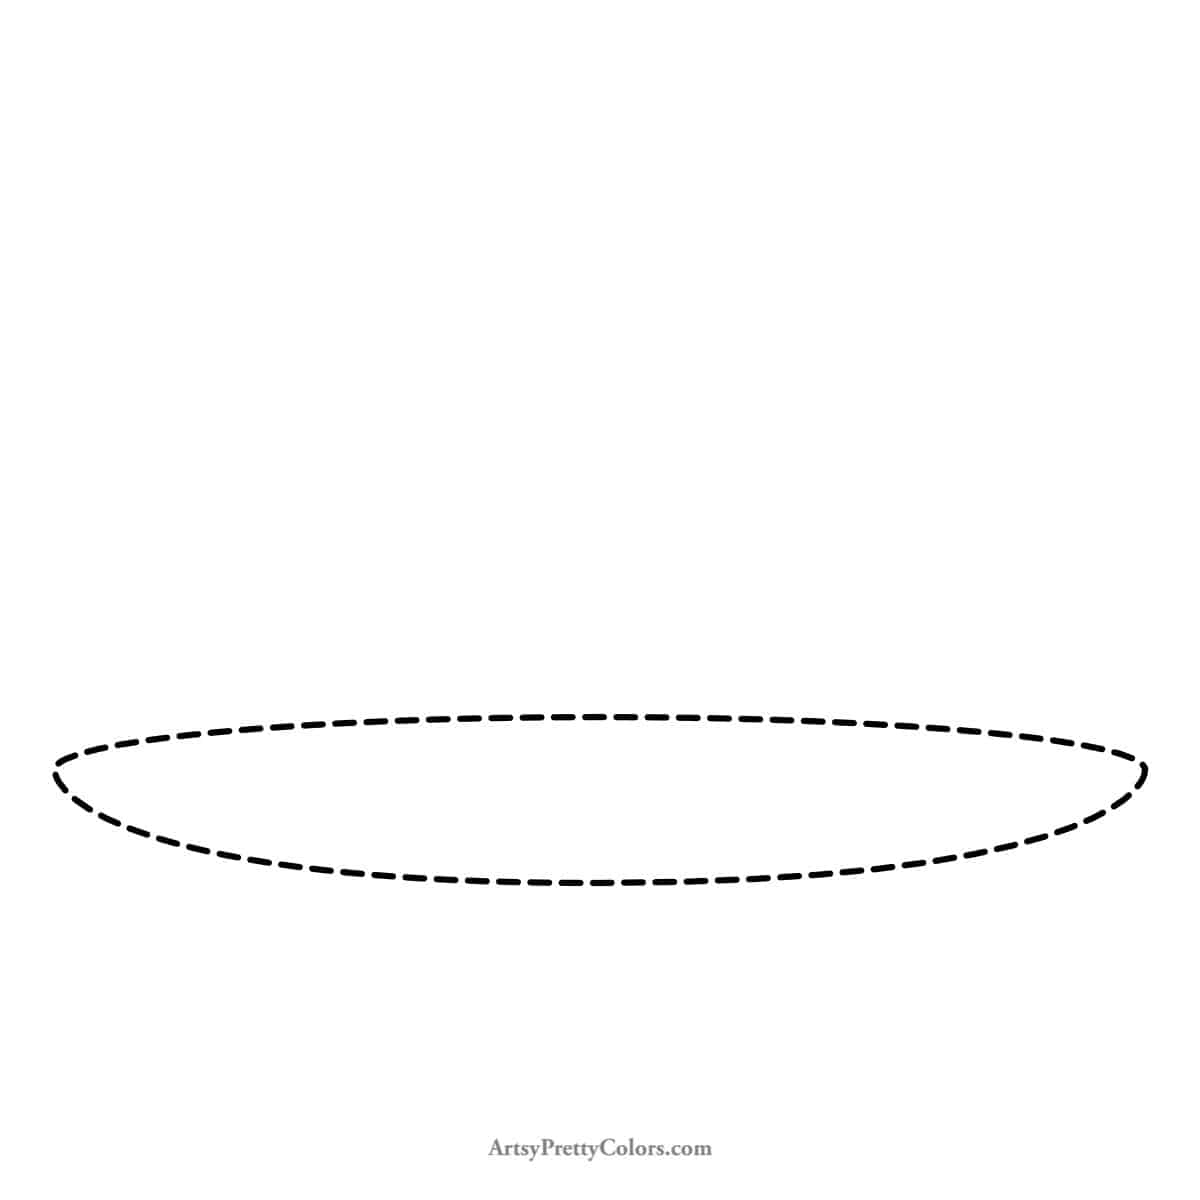 an oval drawn as a dotted line